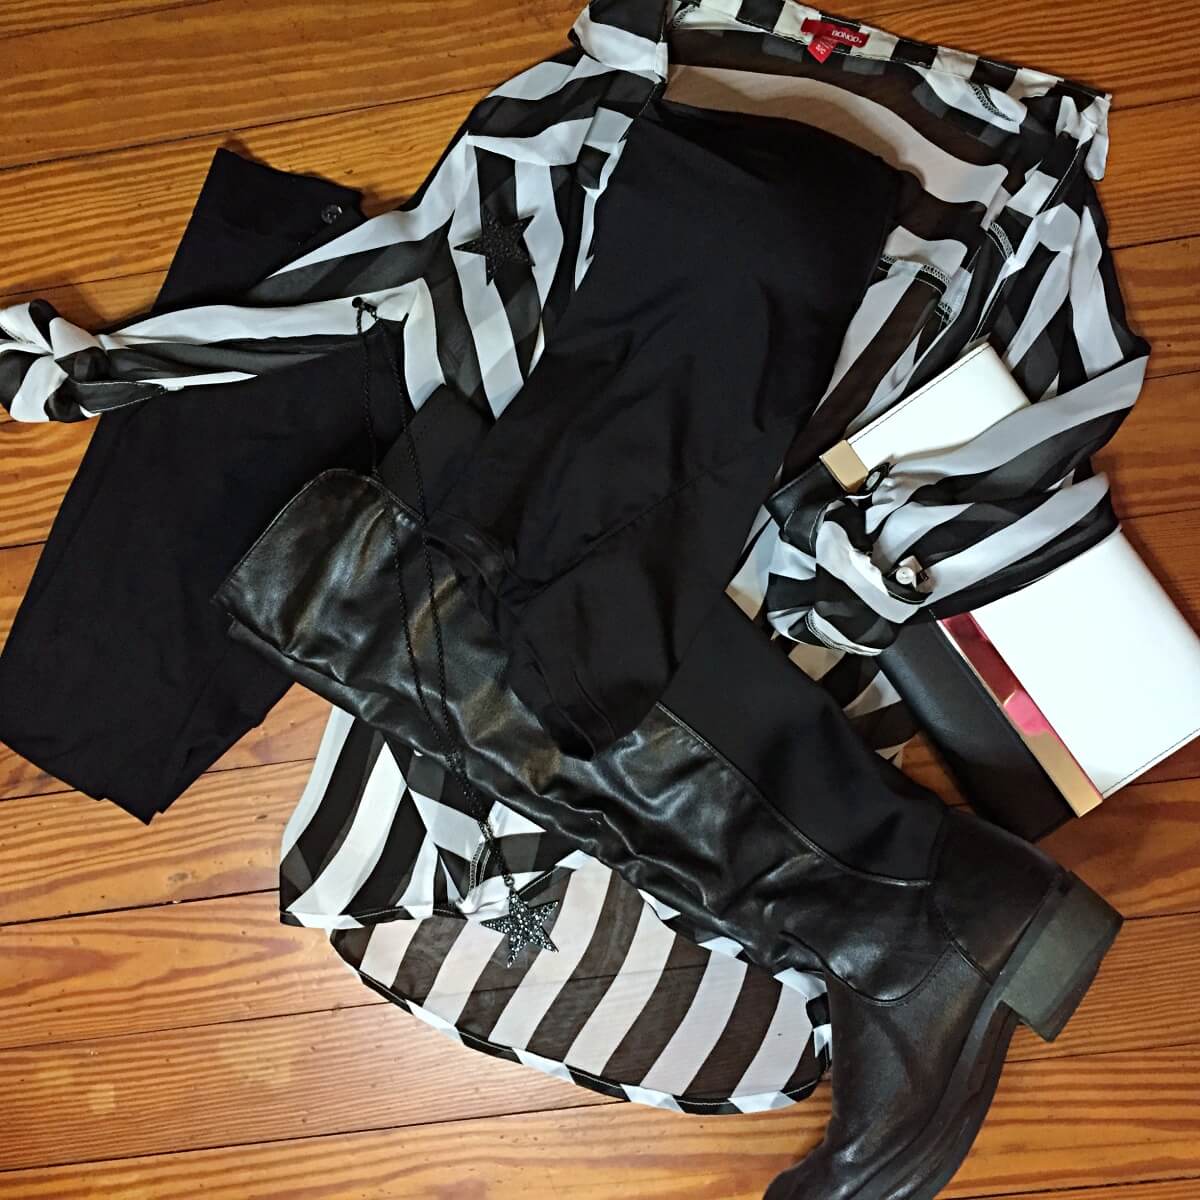 black and white stripe surplice blouse outfit